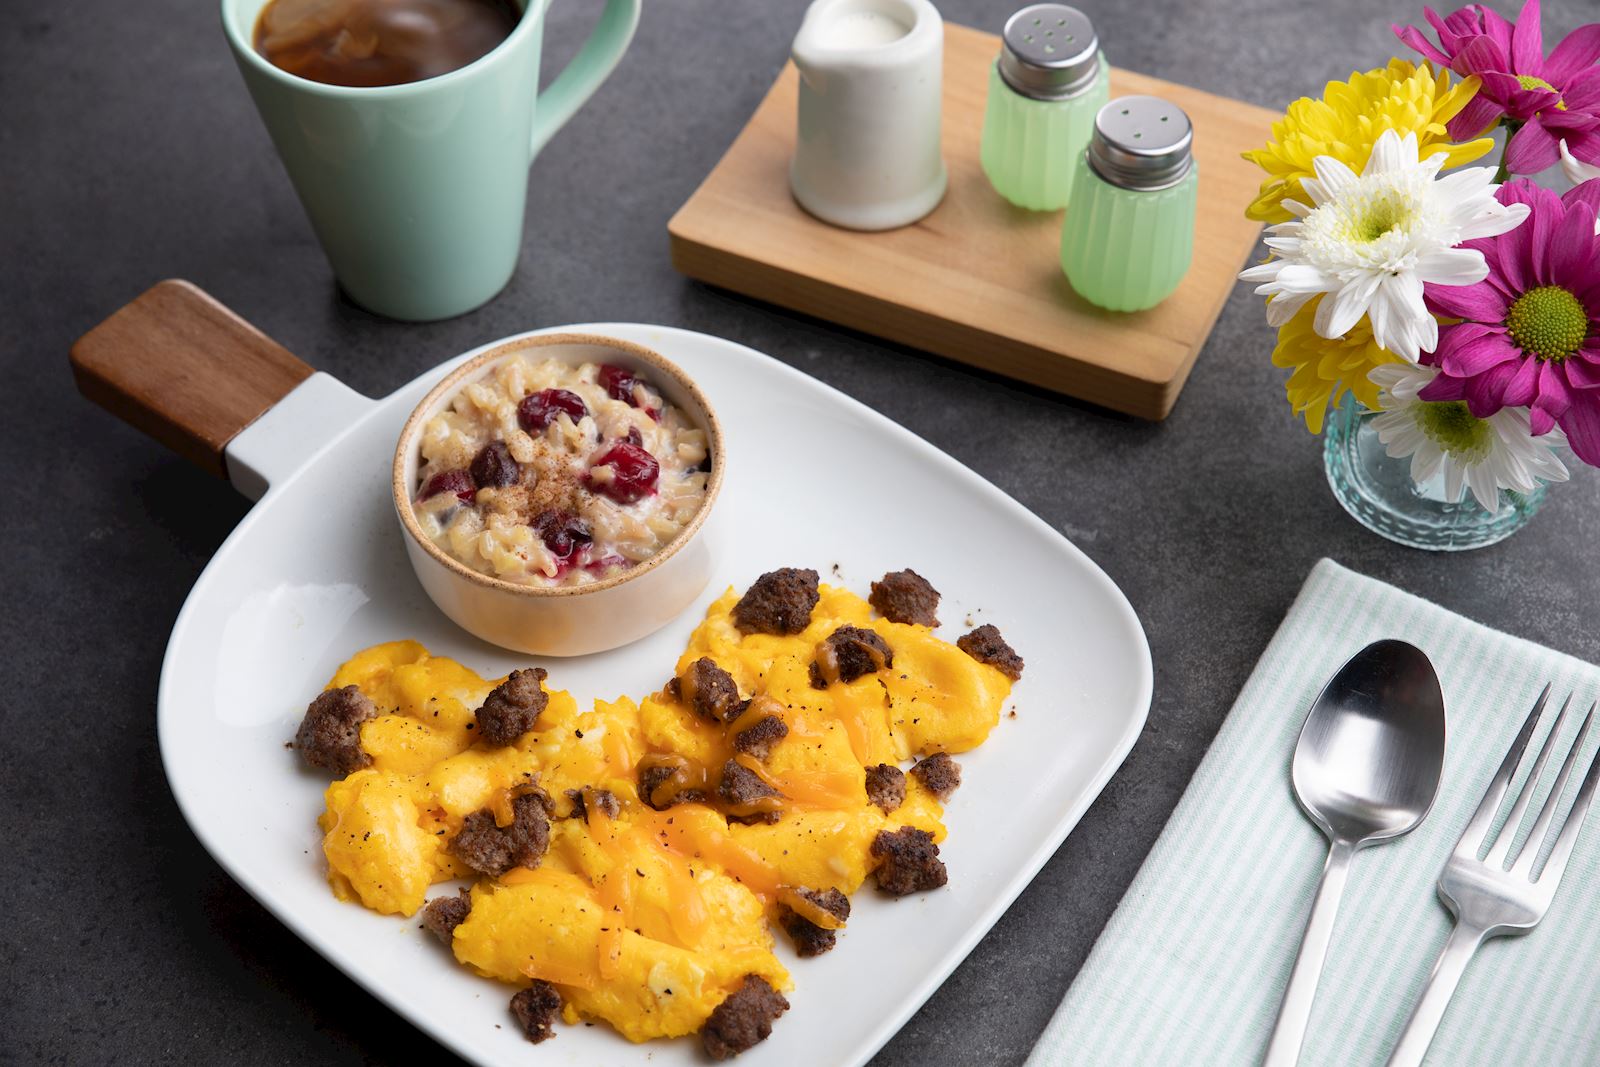 Cheesy Egg and Turkey Scramble with Cranberry Rice Pudding